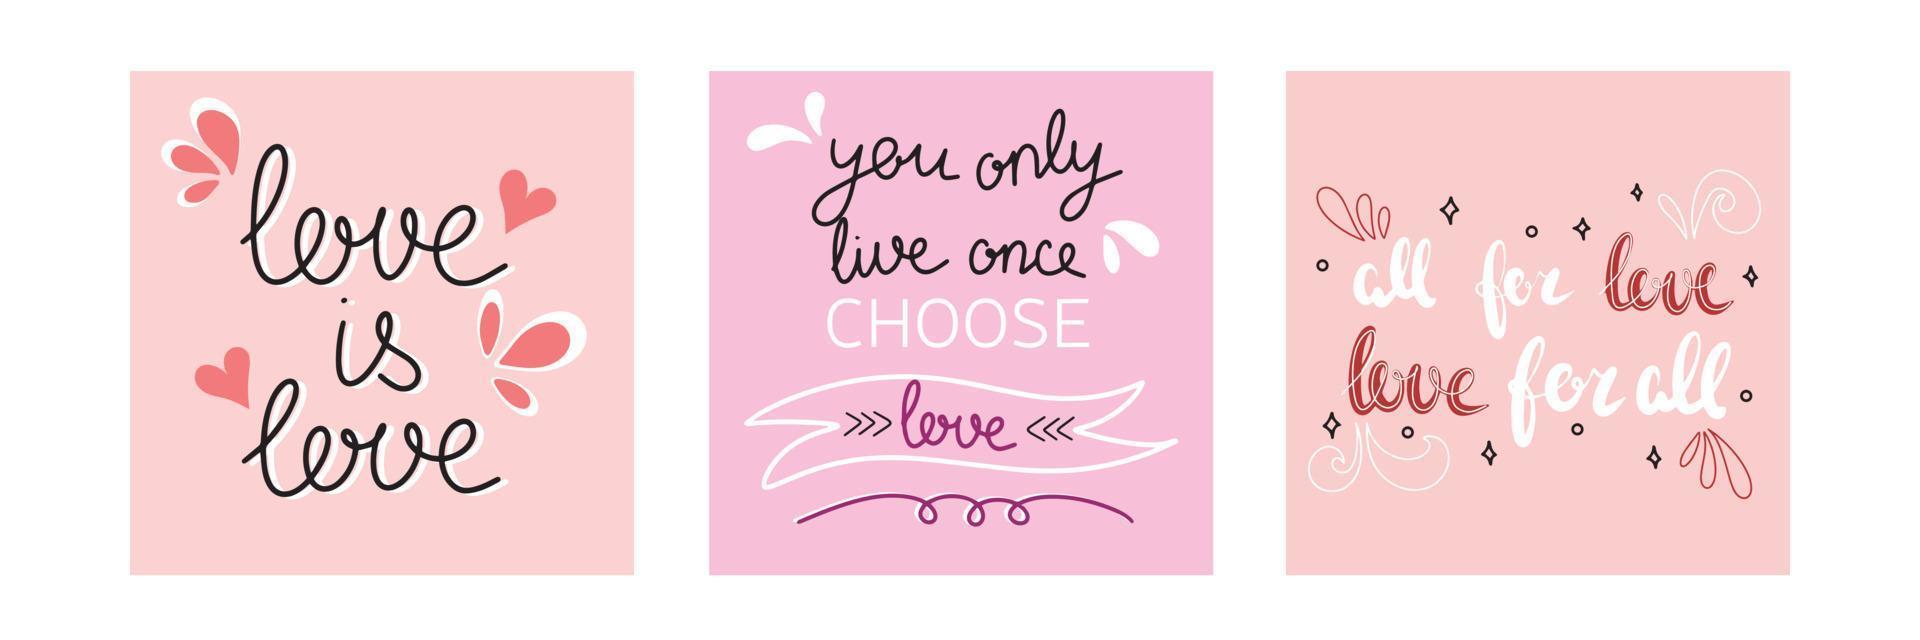 Love square pink banner. Love is love. You only live once choose love. vector